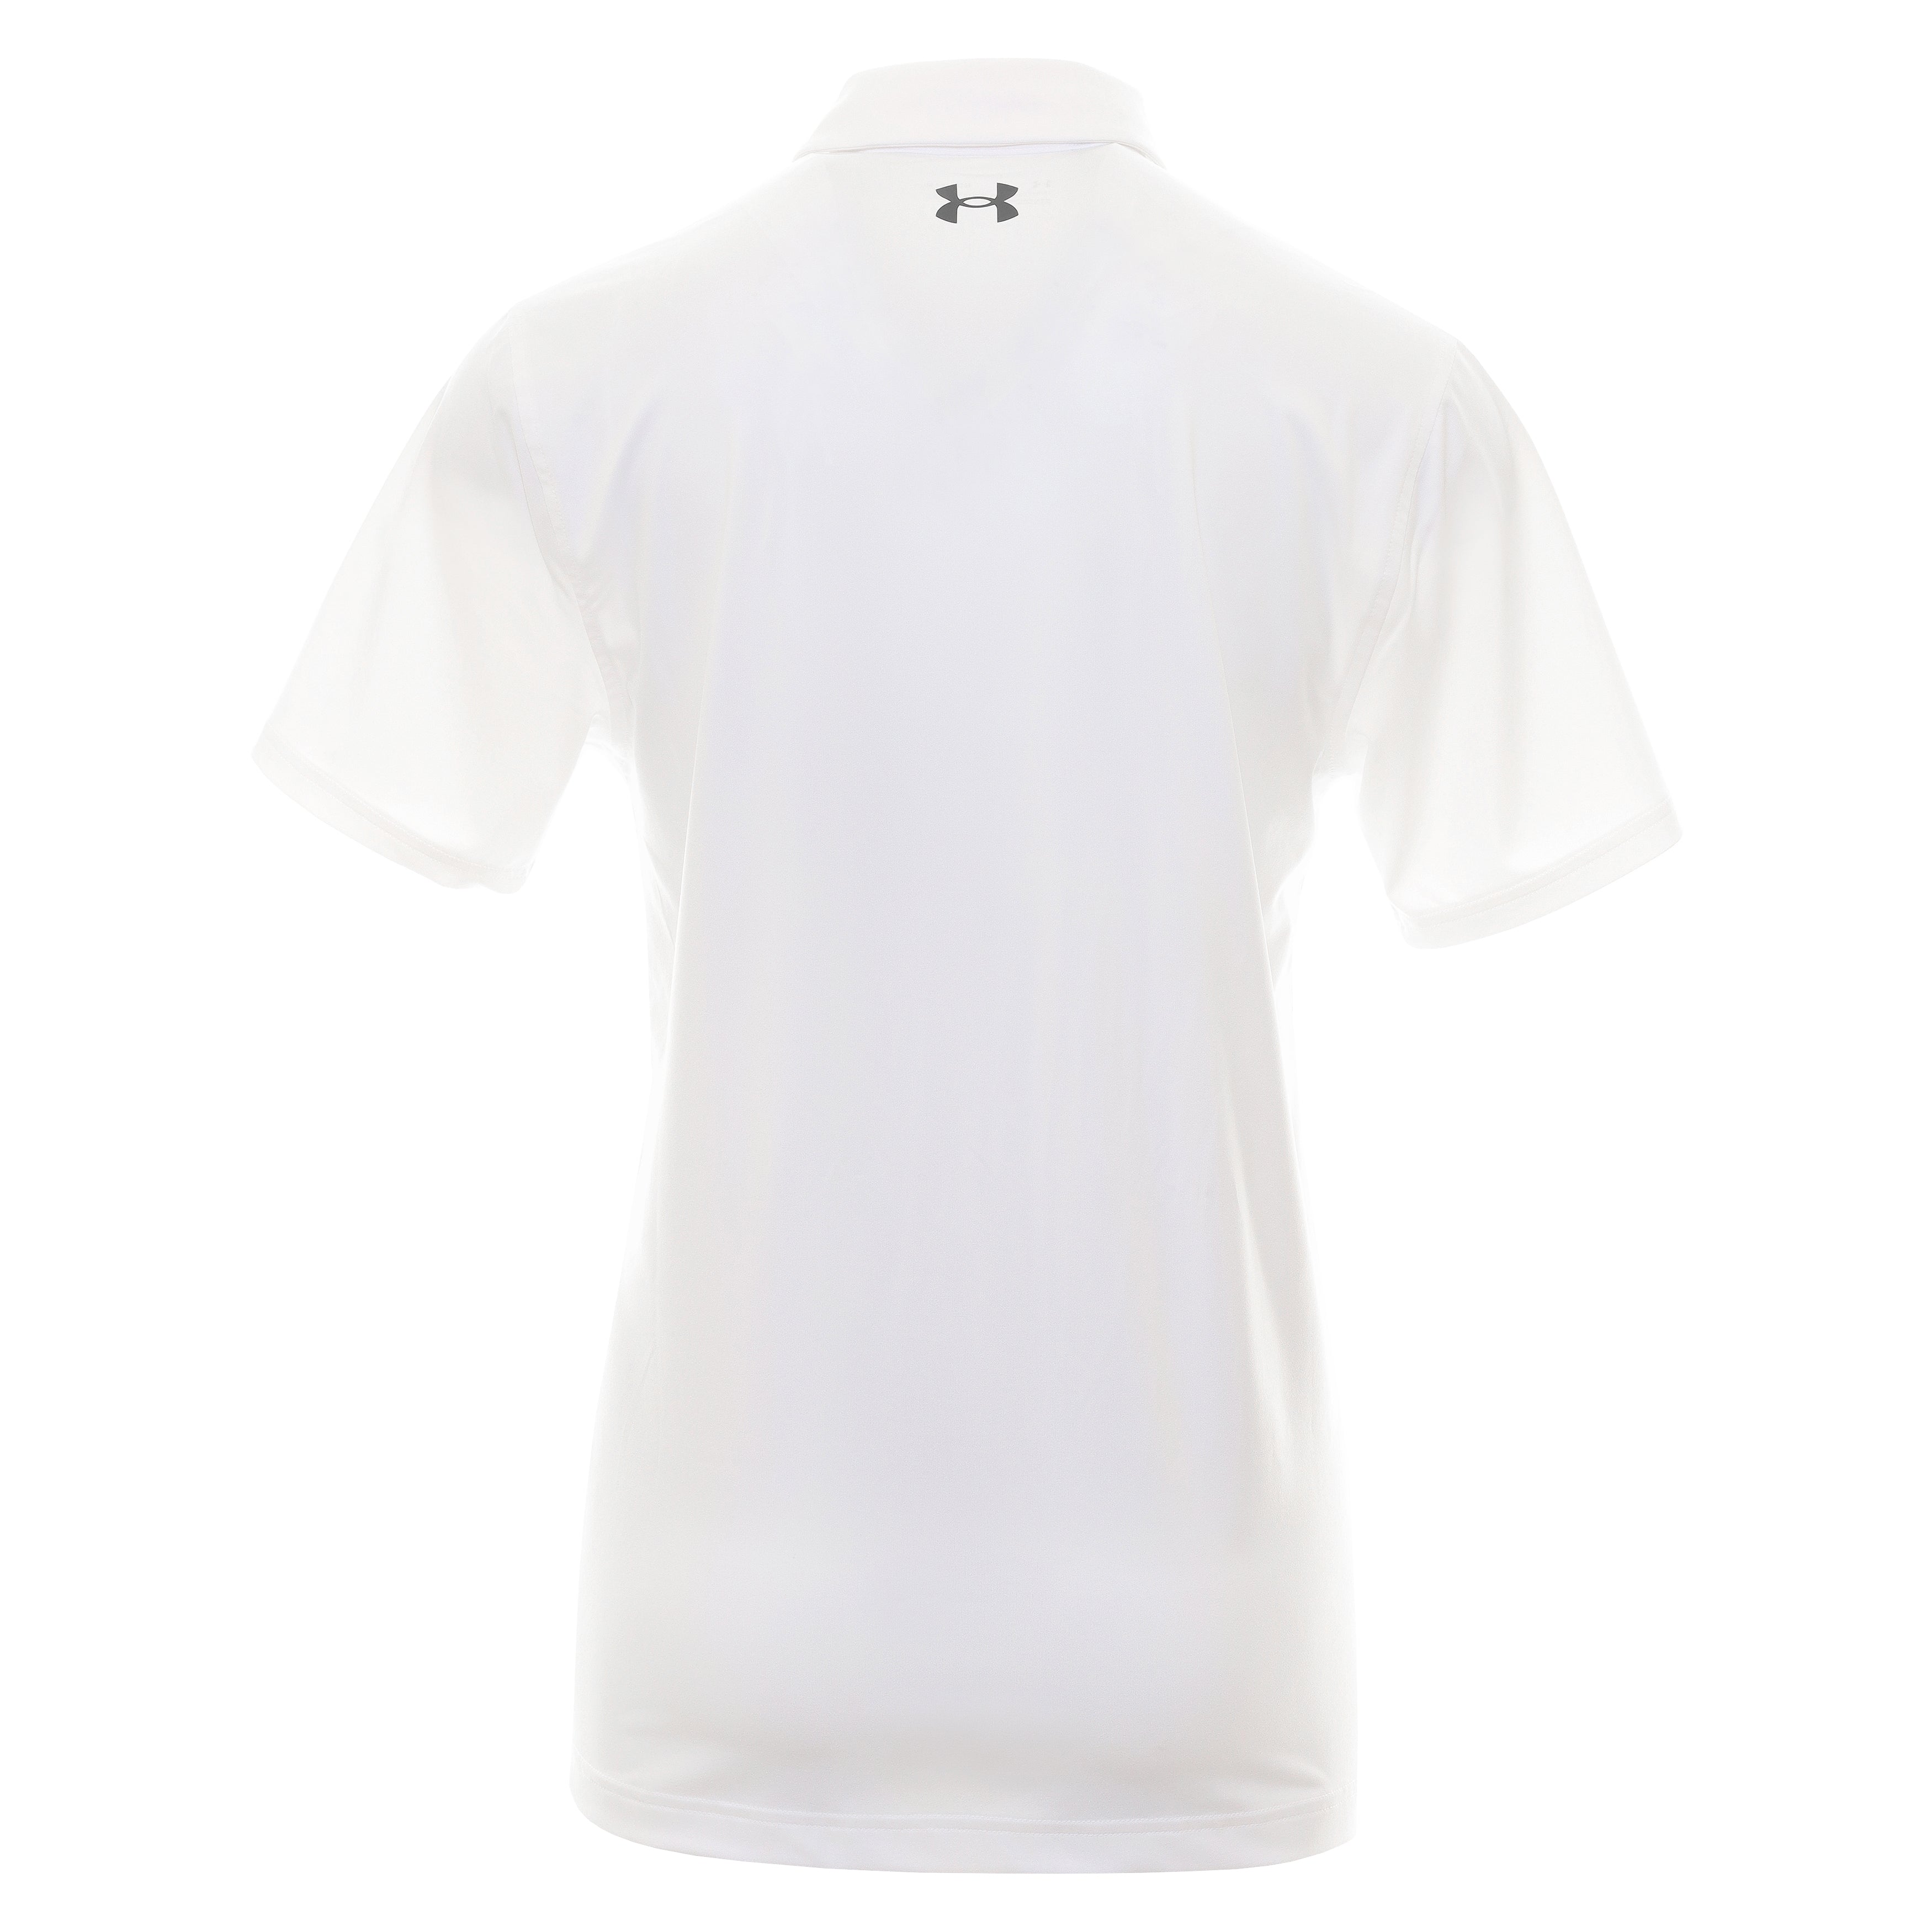 Under Armour Golf T2G Shirt 1383714 White 100 & Function18